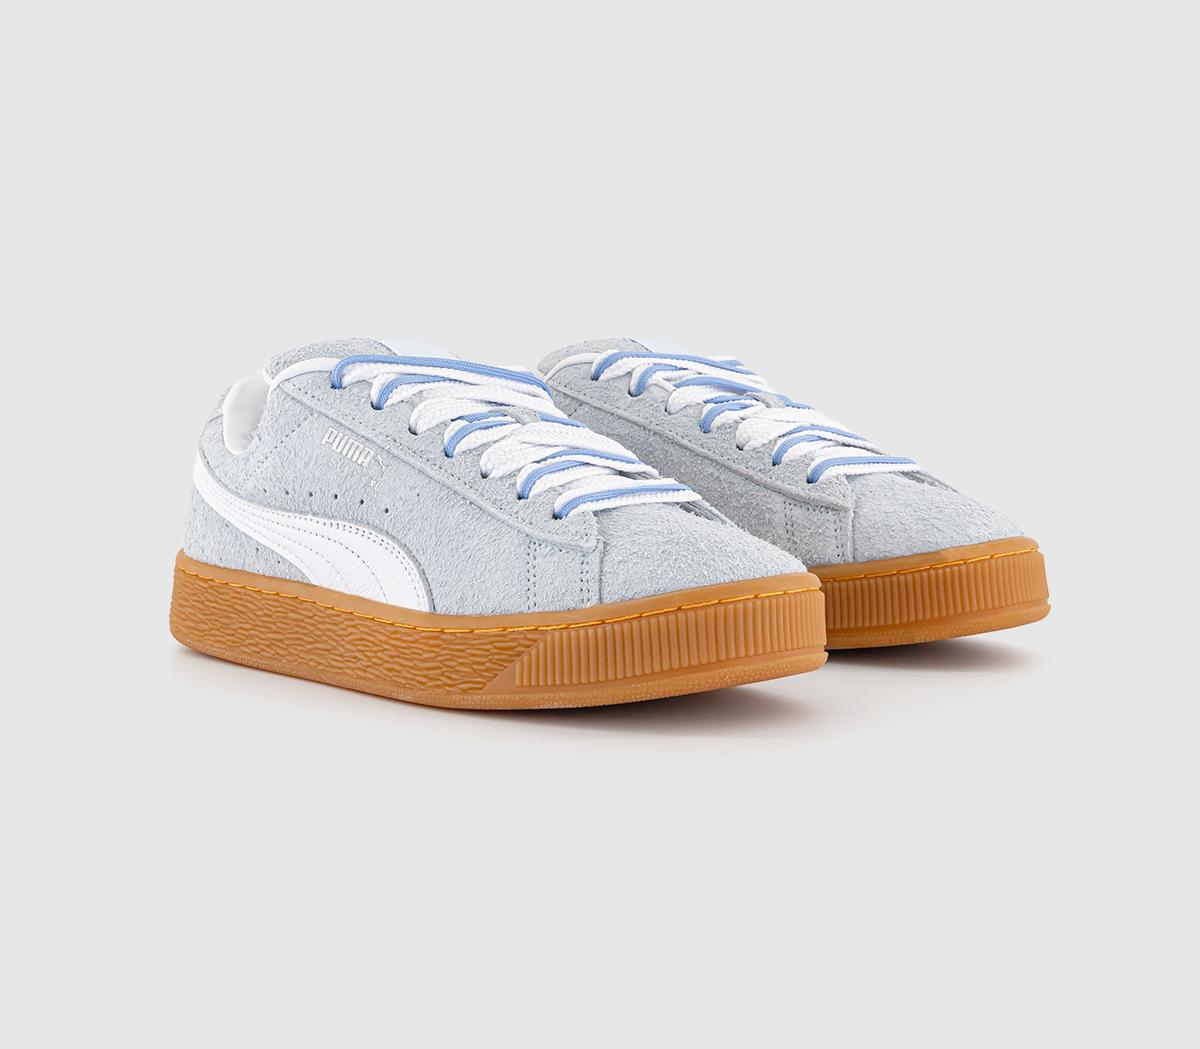 Puma Womens Suede Xl Trainers Icy Blue White Silver, 8